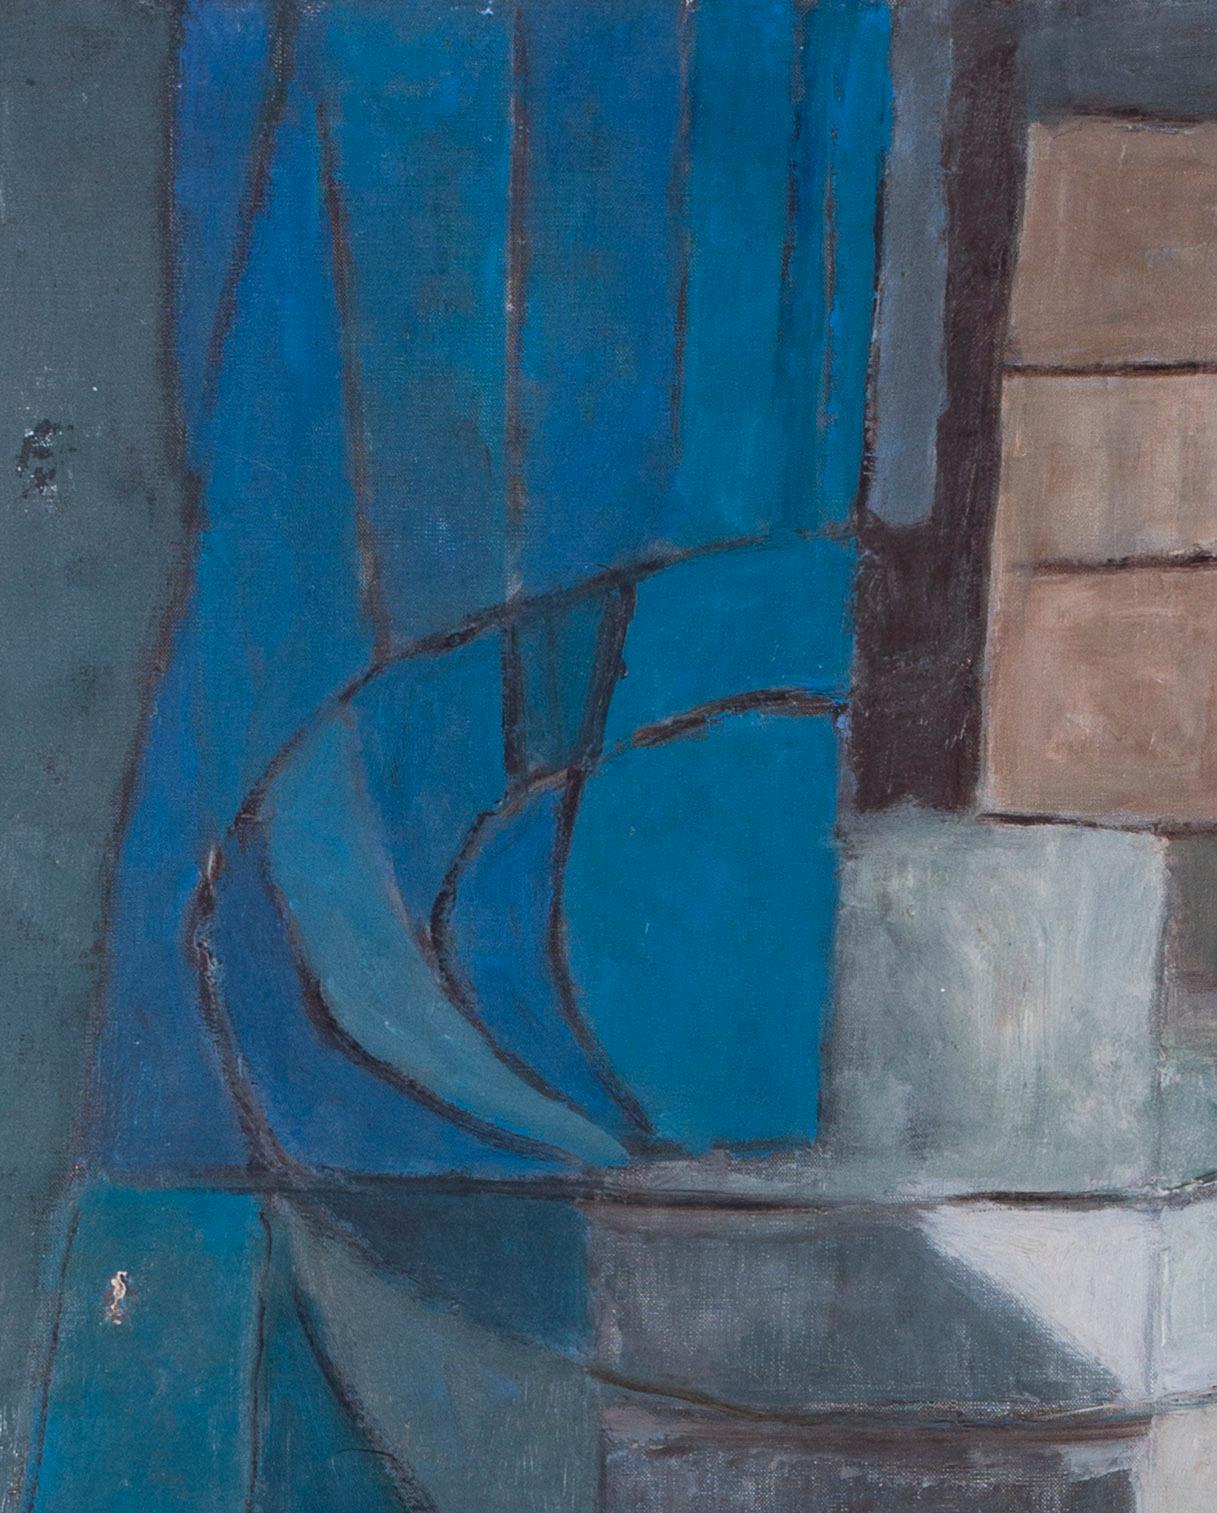 Henri d’Amfreville (French, 1905-1964)
Abstract in blue, green and grey
Oil on canvas
32 x 25.1/2 in. (81.5 x 65 cm.)

This was bought from auction directly from the family of the artist’s estate.
